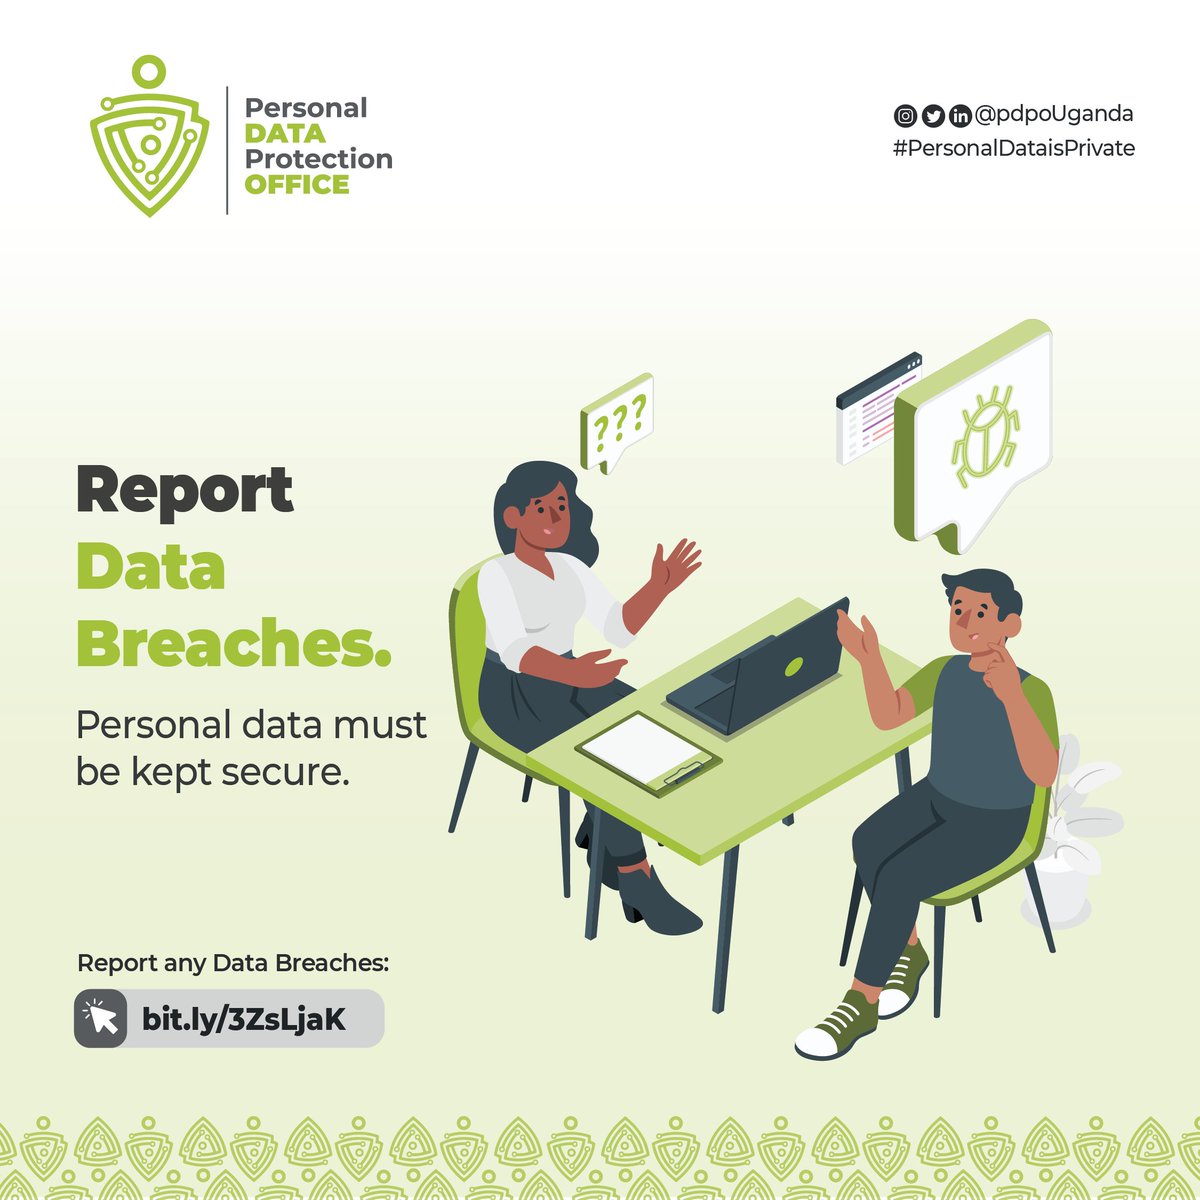 Data breaches can happen to anyone. If you suspect a data breach, notify your Data Protection Officer (DPO) immediately. The DPO will then notify the @pdpoUG right away. Stay vigilant and protect the personal data within your custody. #PersonalDataisPrivate #DataPrivacyUG